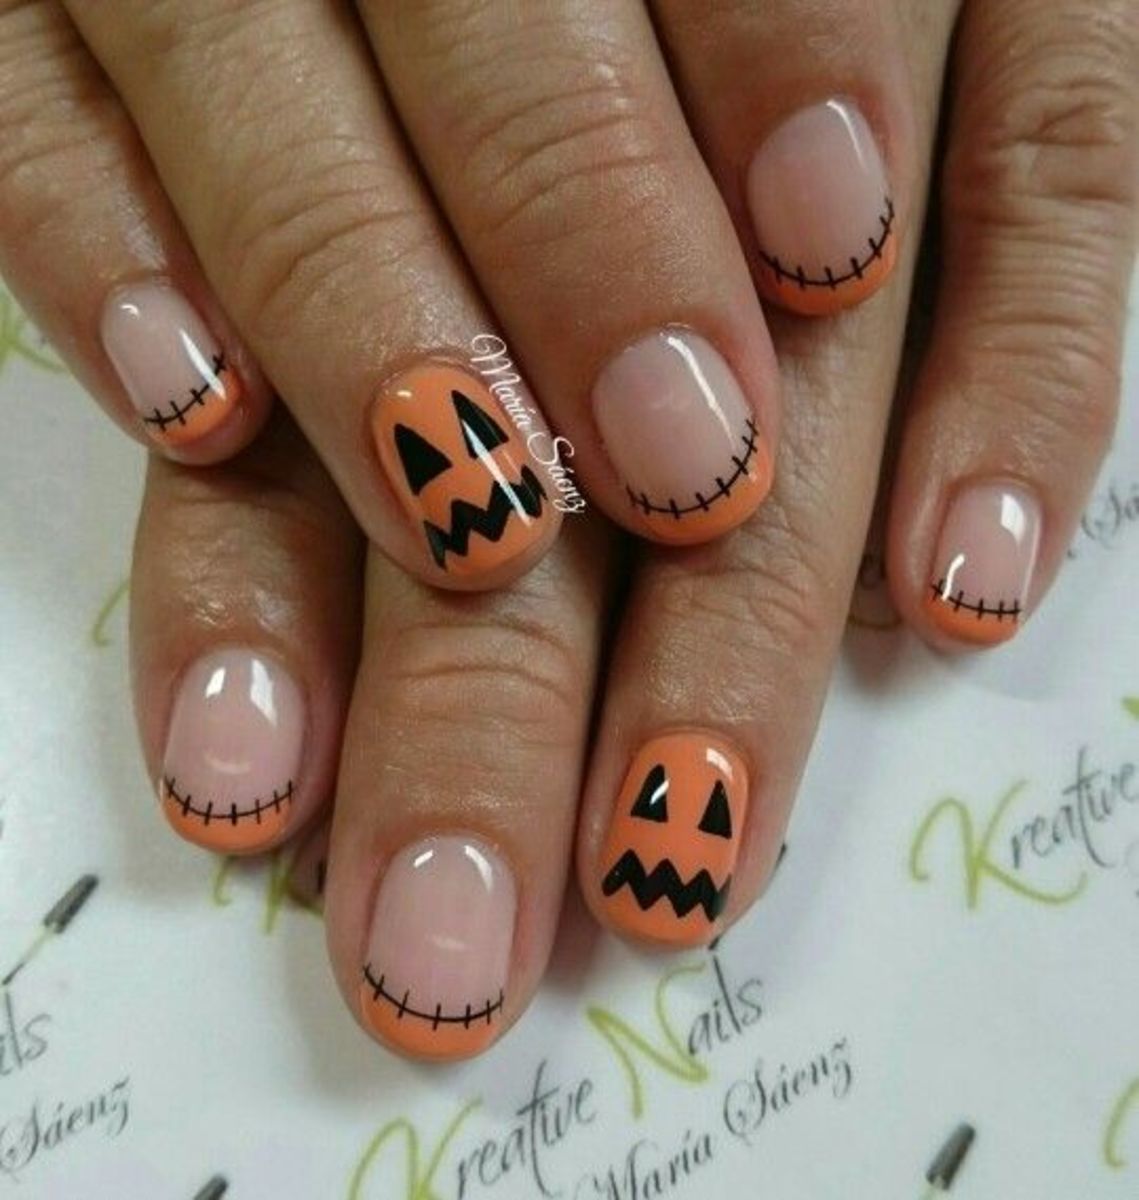 Show you are ready for Halloween with Jack-O-Lantern designs on your nails!